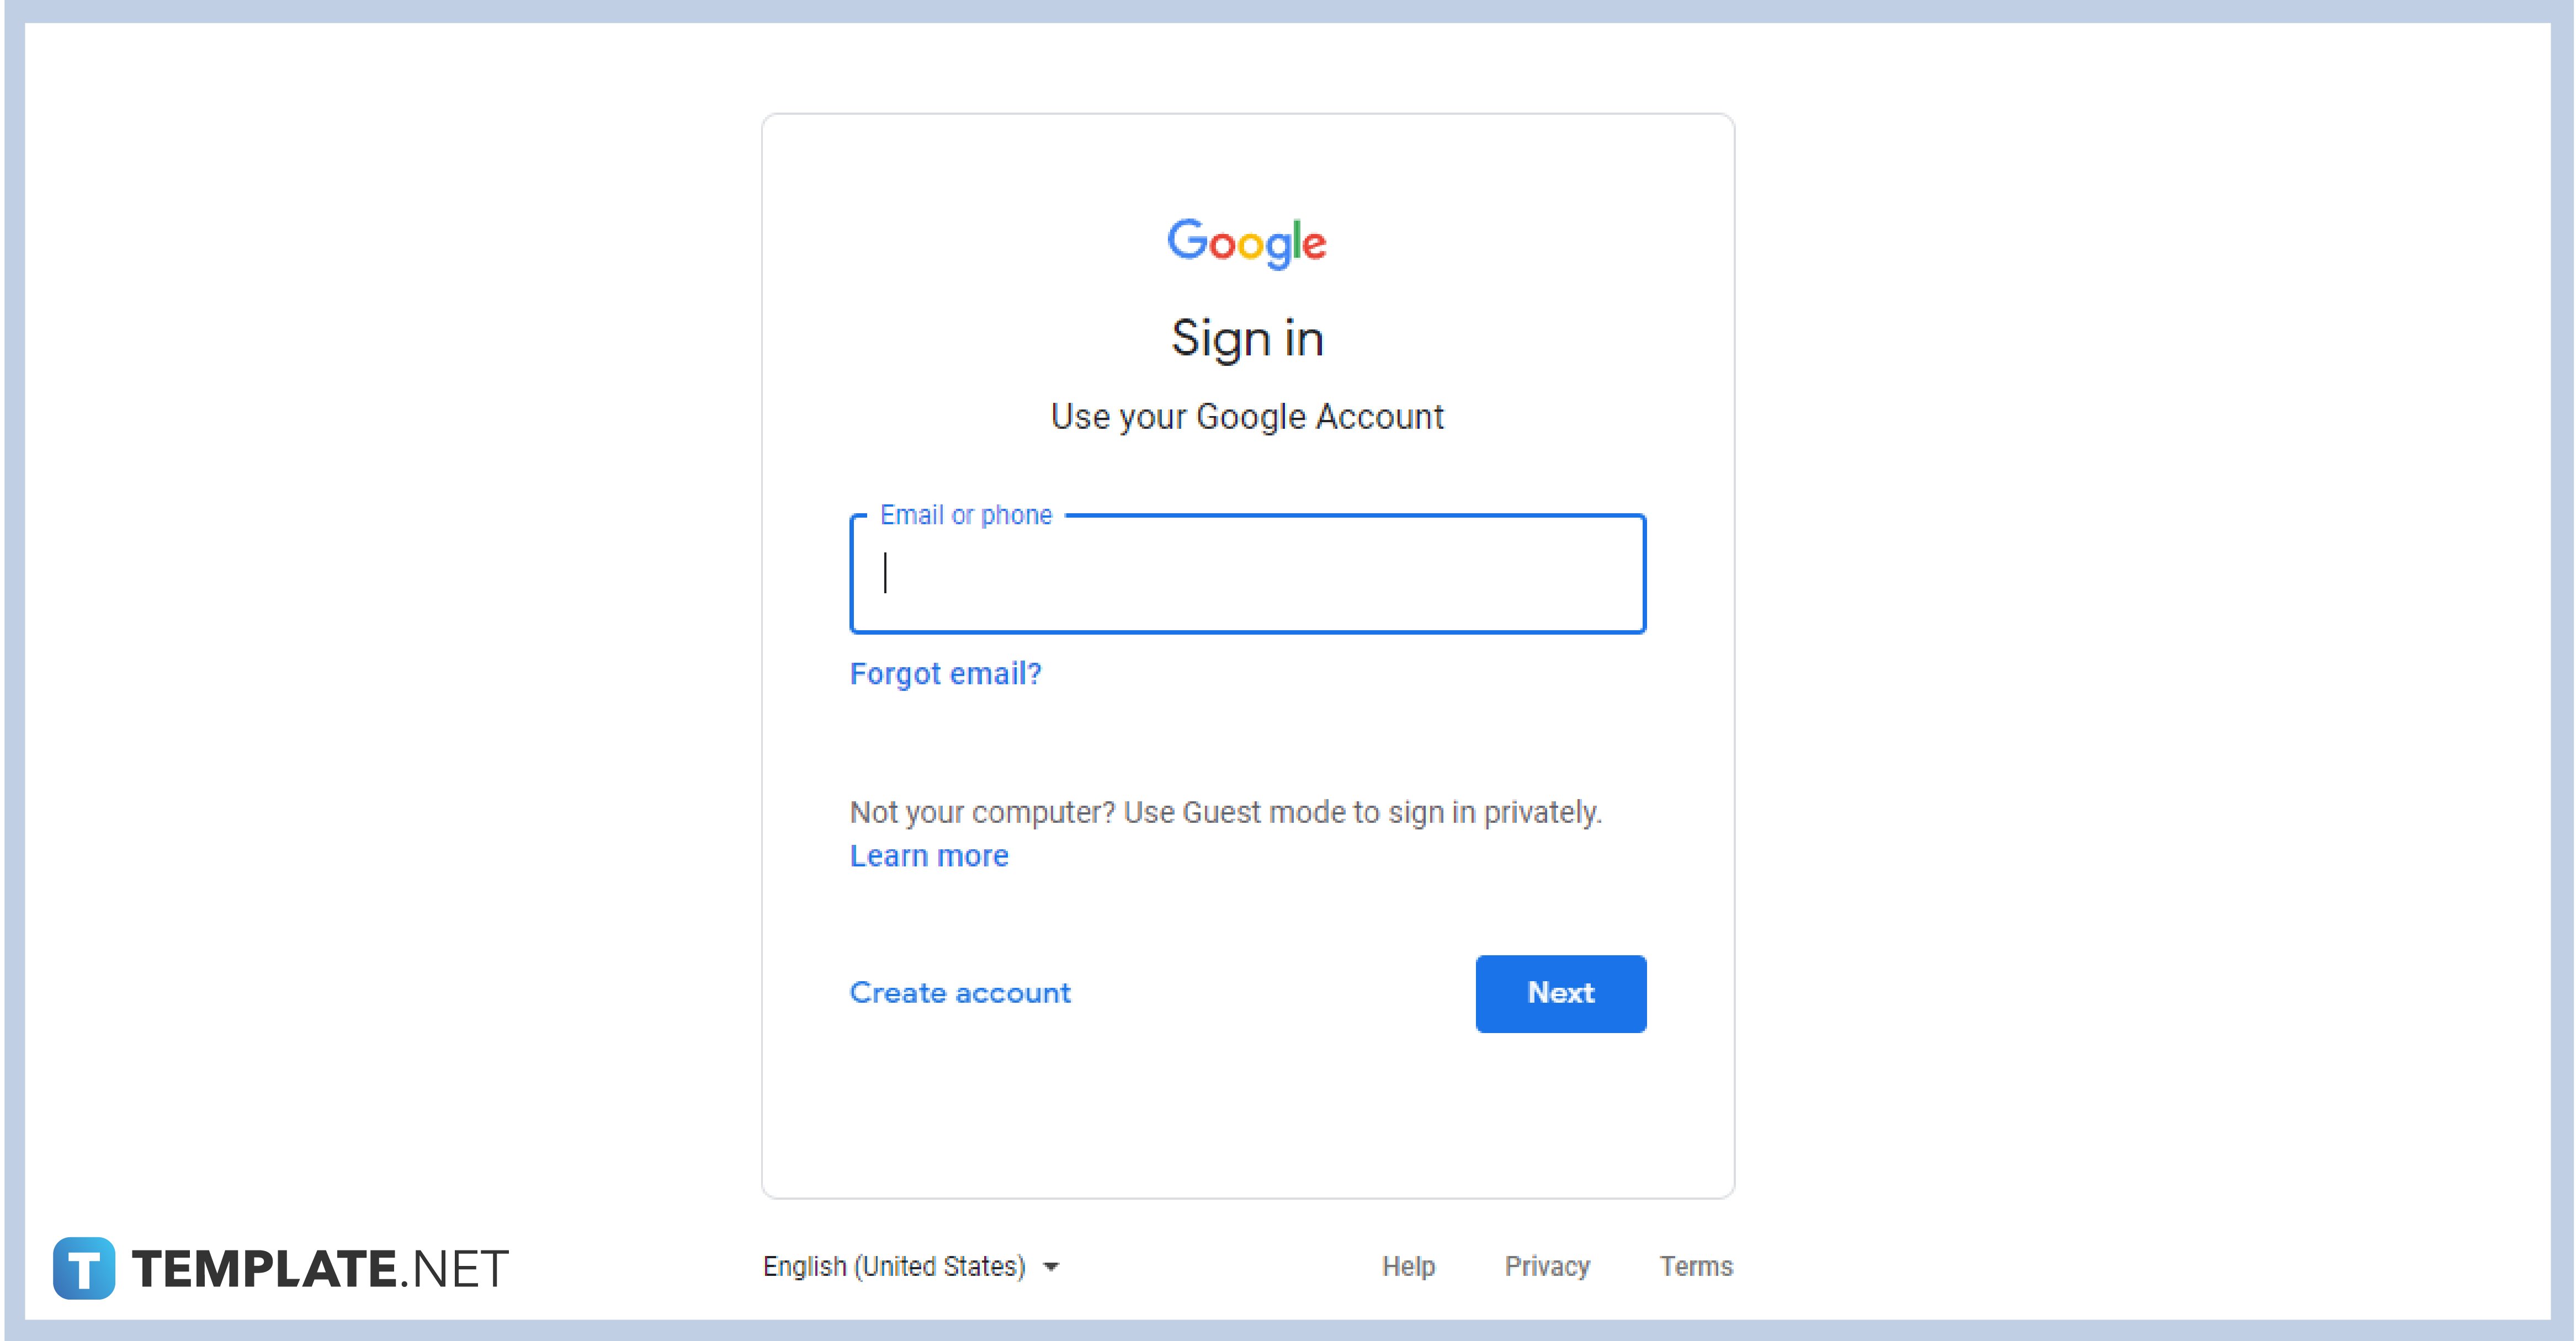 step-1-sign-in-with-your-account-018